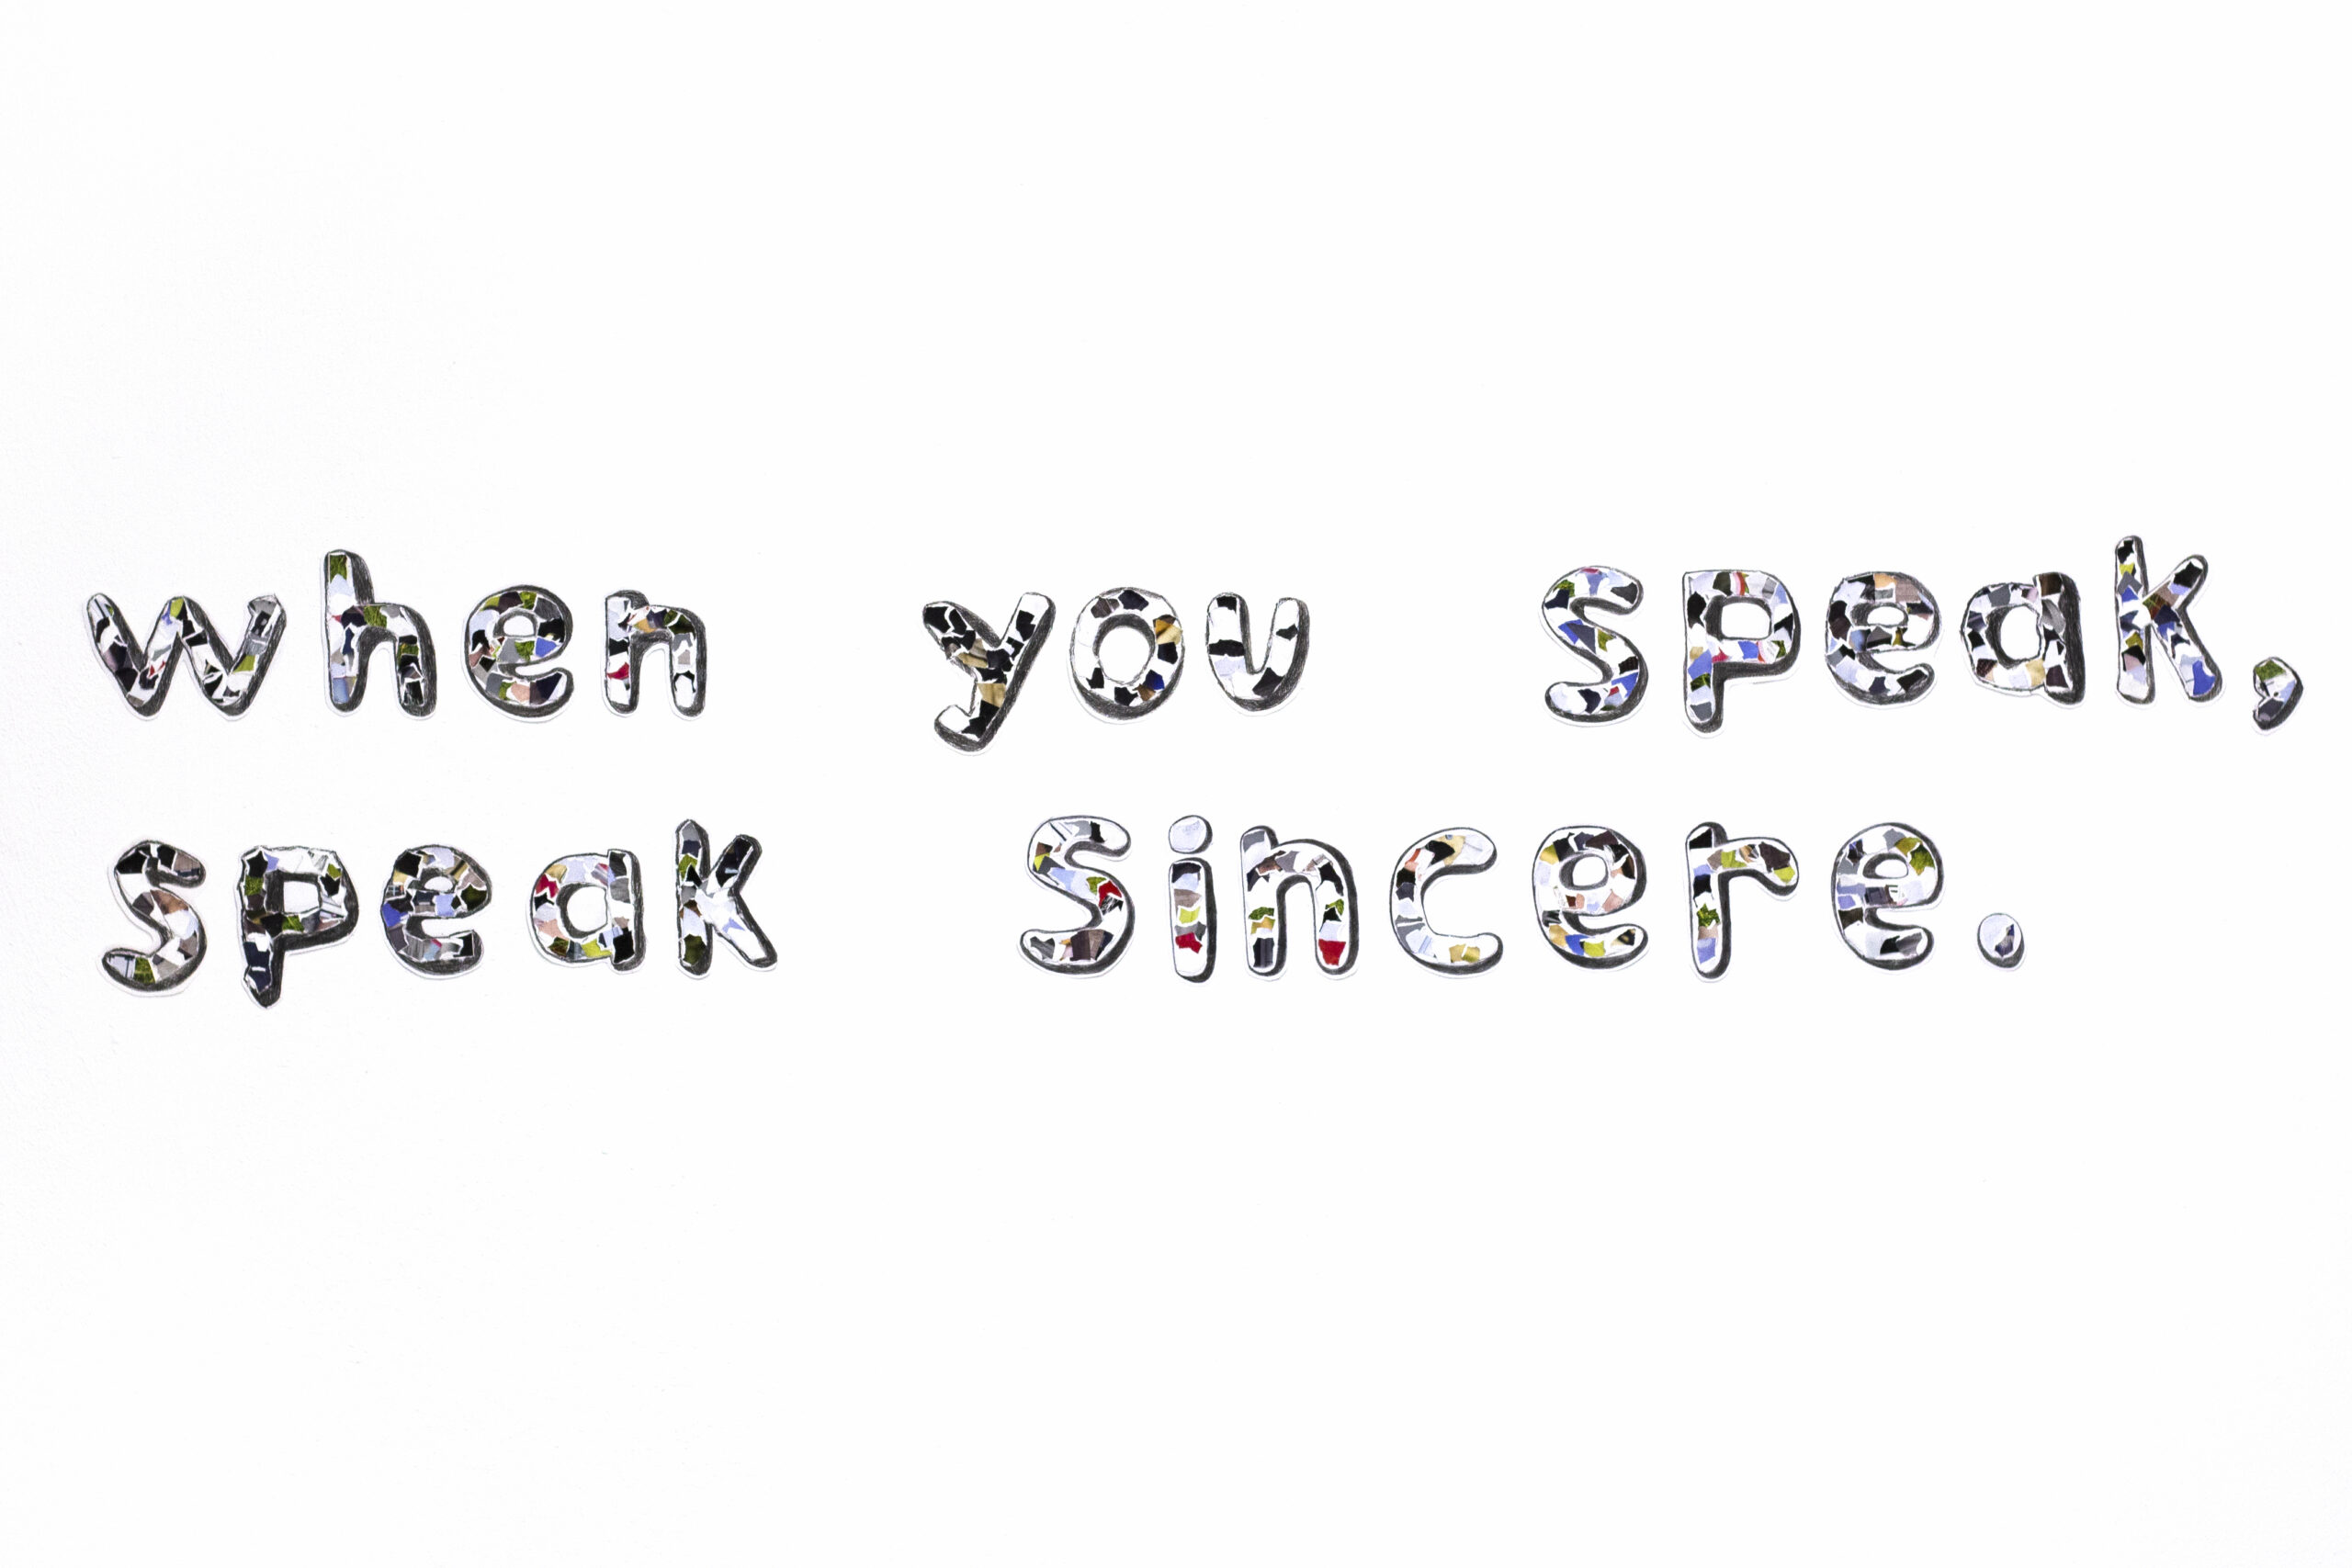 Mosaic patterned letters created with scrap bits of paper, outlined and shaded with black. The letters read ‘when you speak, speak sincere’.